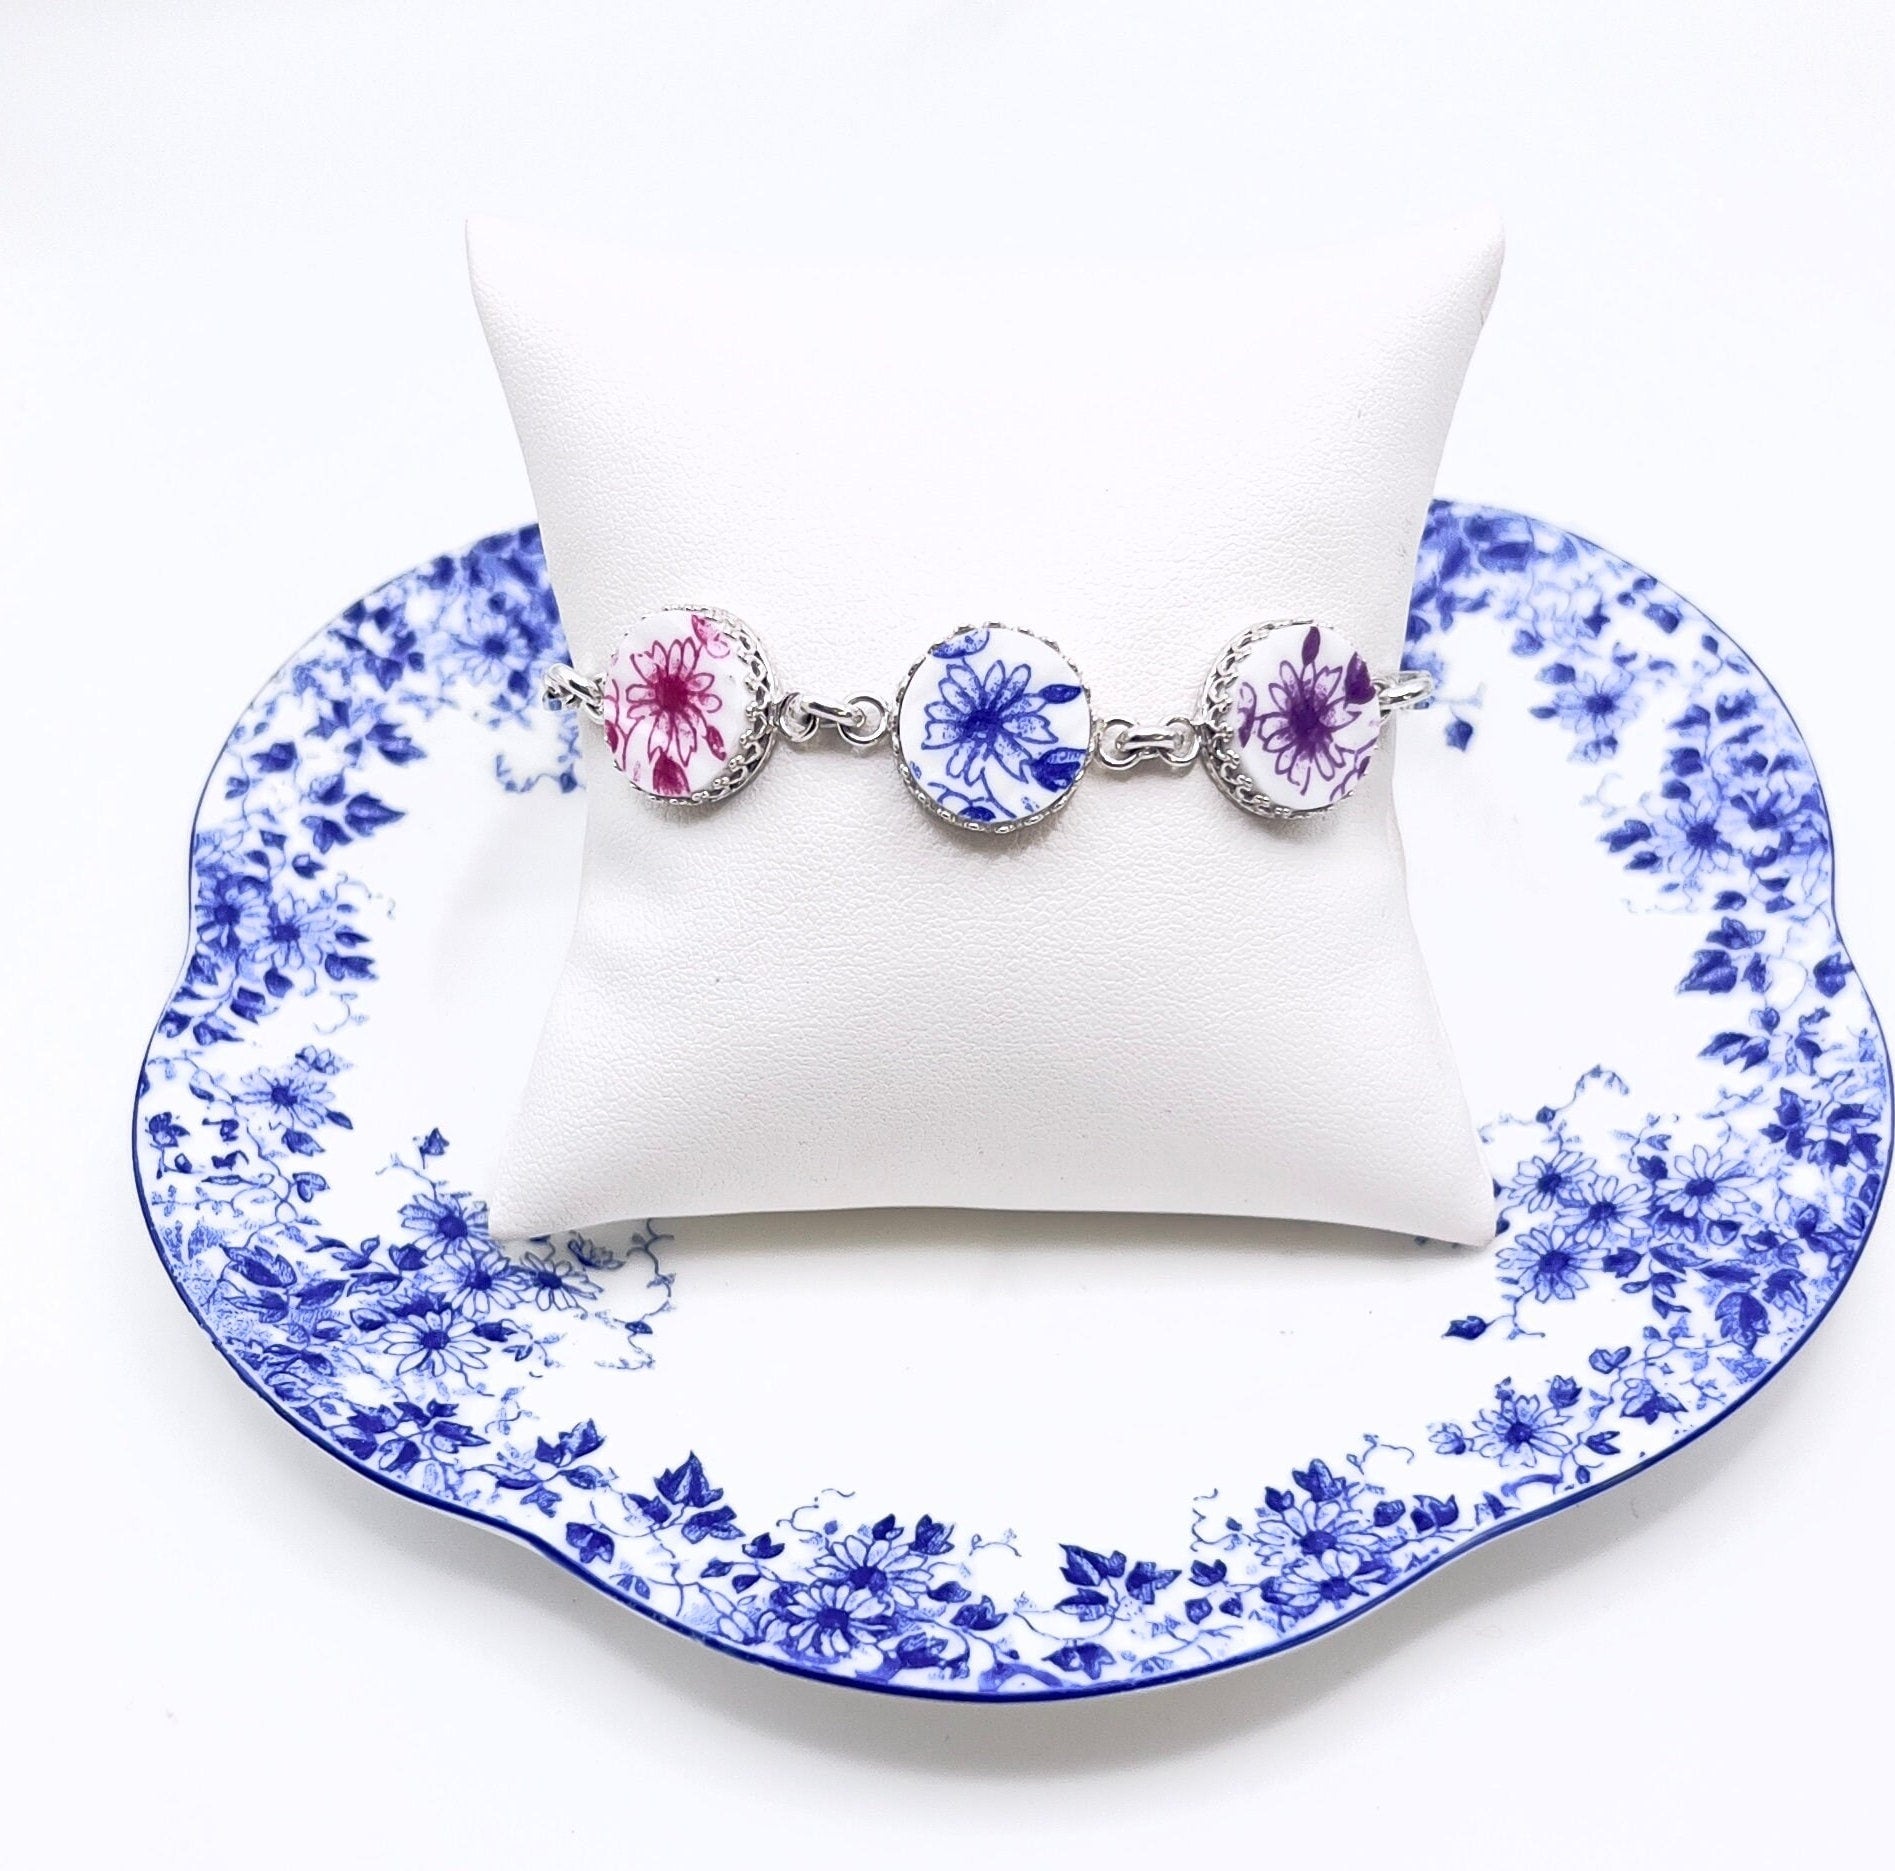 Porcelain Jewelry Bracelet, 18th Anniversary Gift for Wife, Shelley Dainty Pink, Blue and Mauve